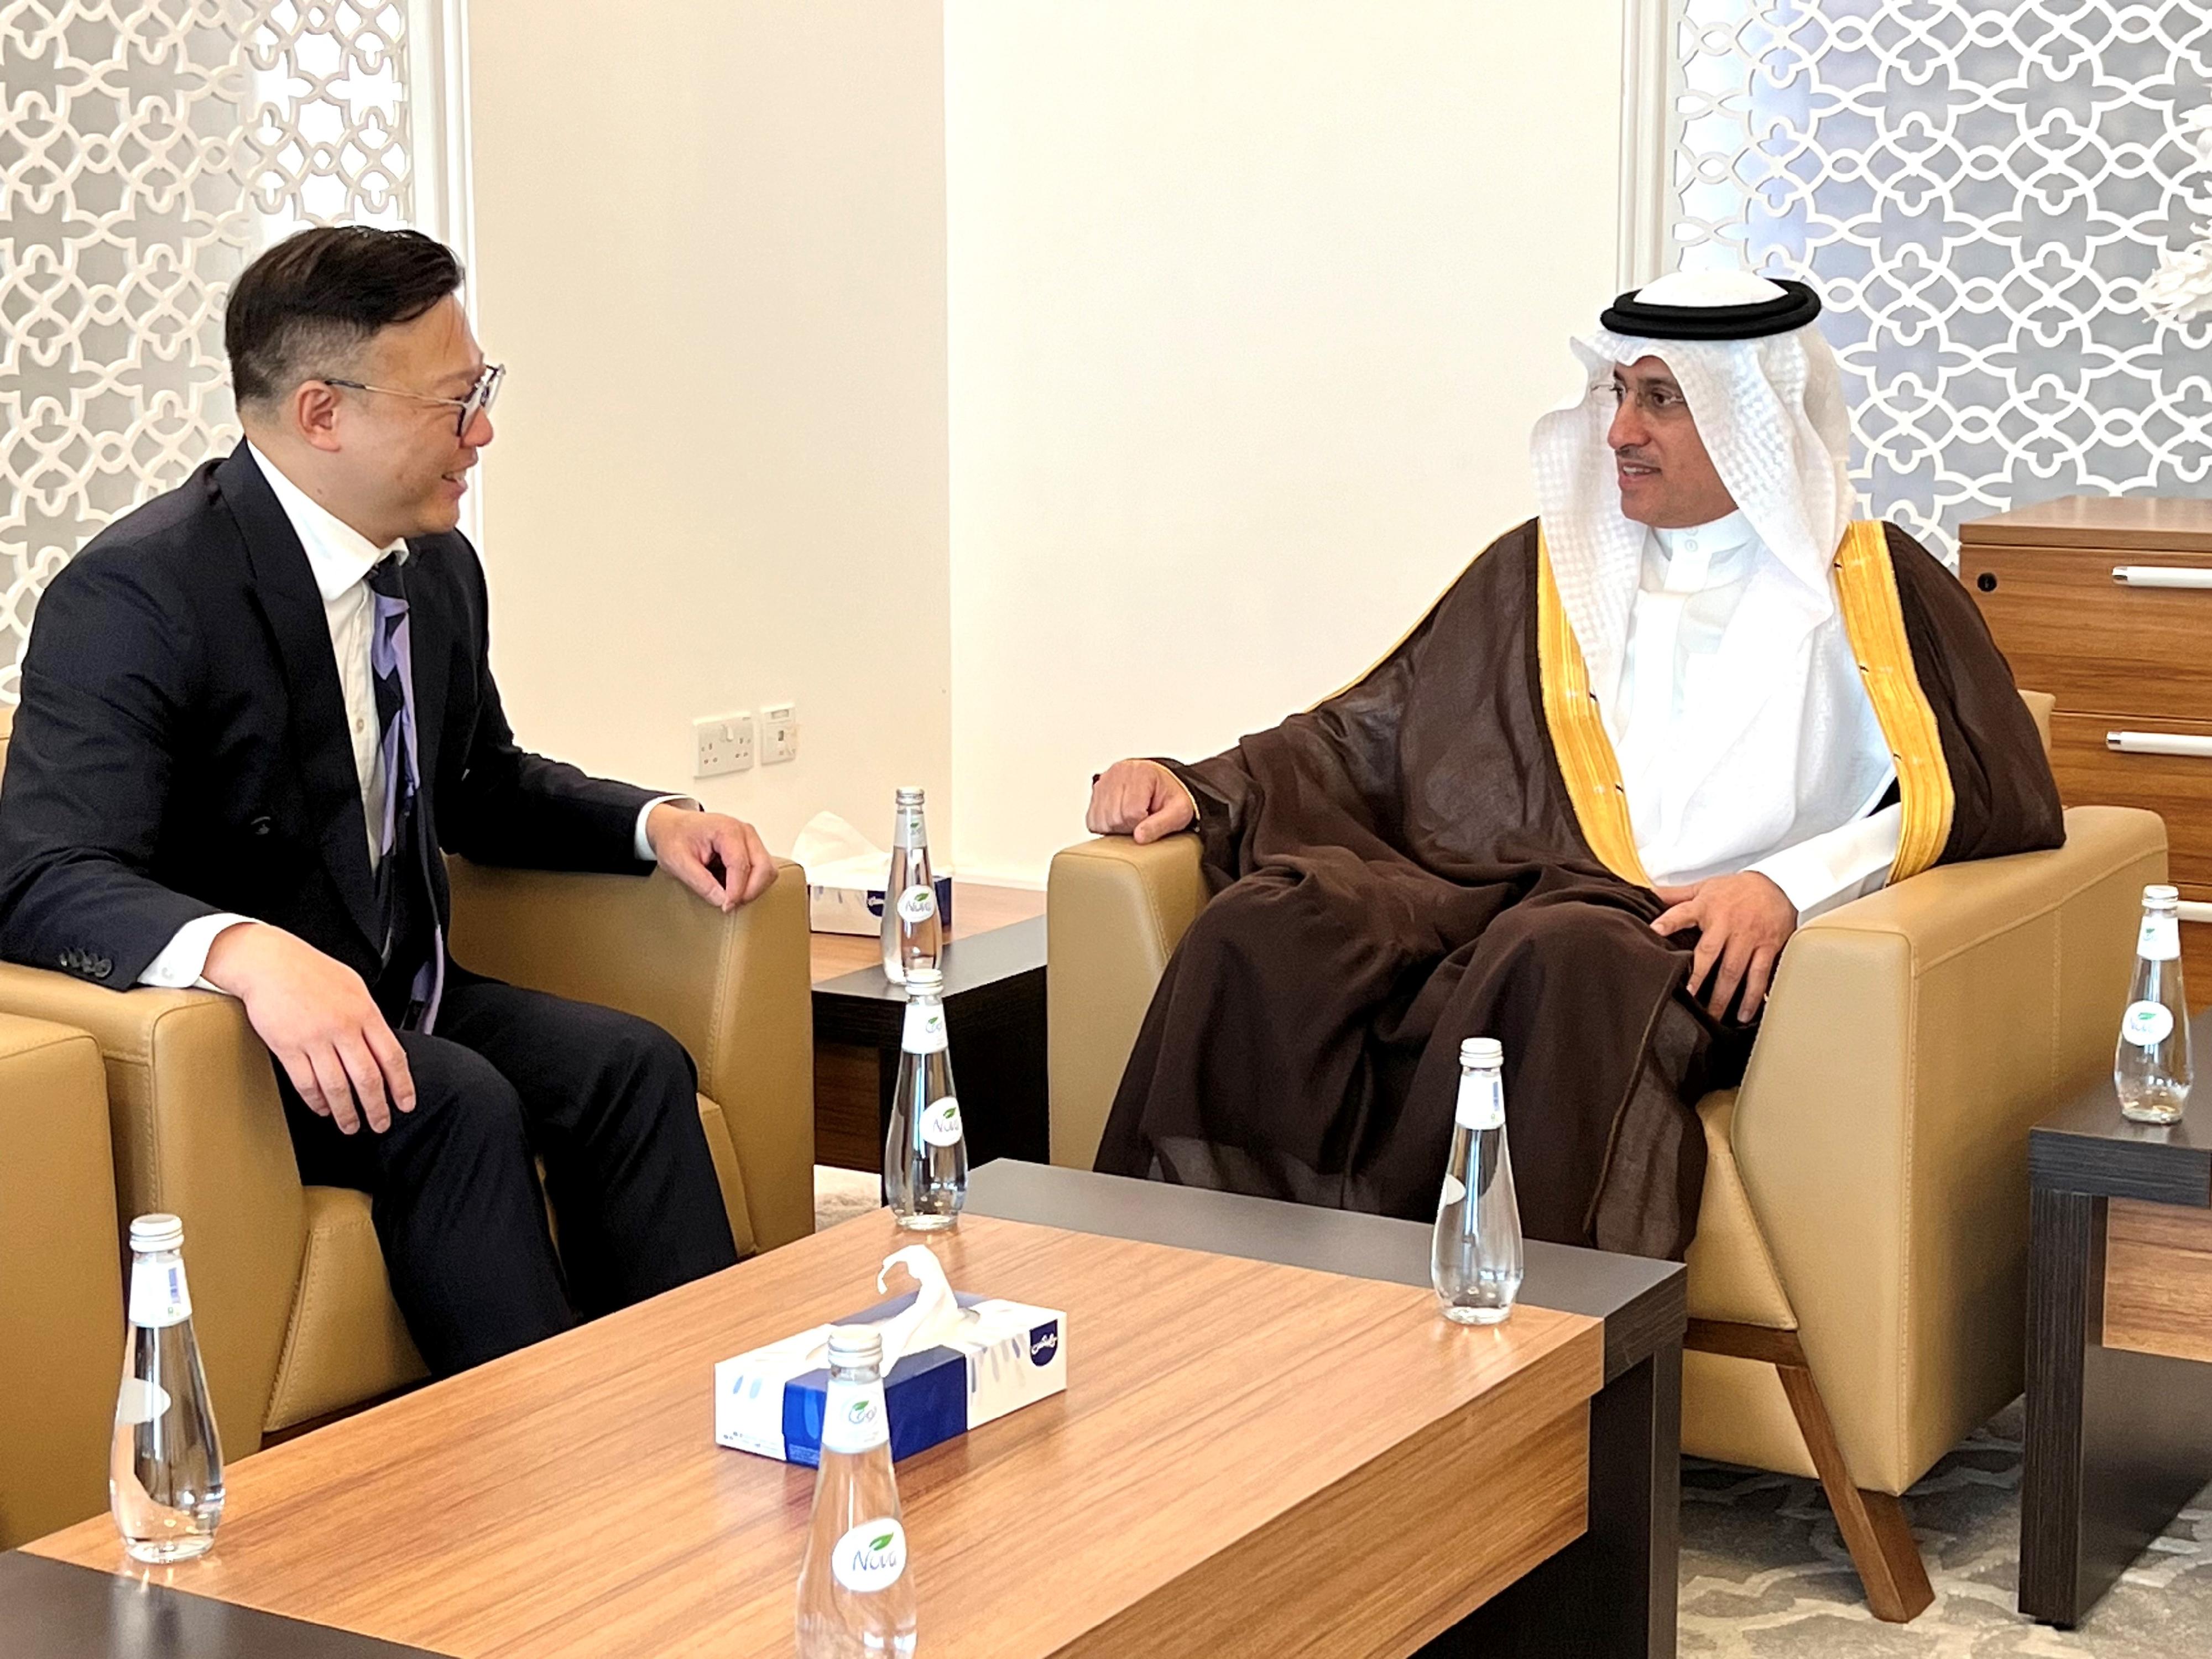 The Deputy Secretary for Justice, Mr Cheung Kwok-kwan (left), meets with the Vice-Minister of Justice of the Kingdom of Saudi Arabia, Dr Najem bin Abdullah al-Zaid (right), in Riyadh, Saudi Arabia, on March 4 (Riyadh time).
